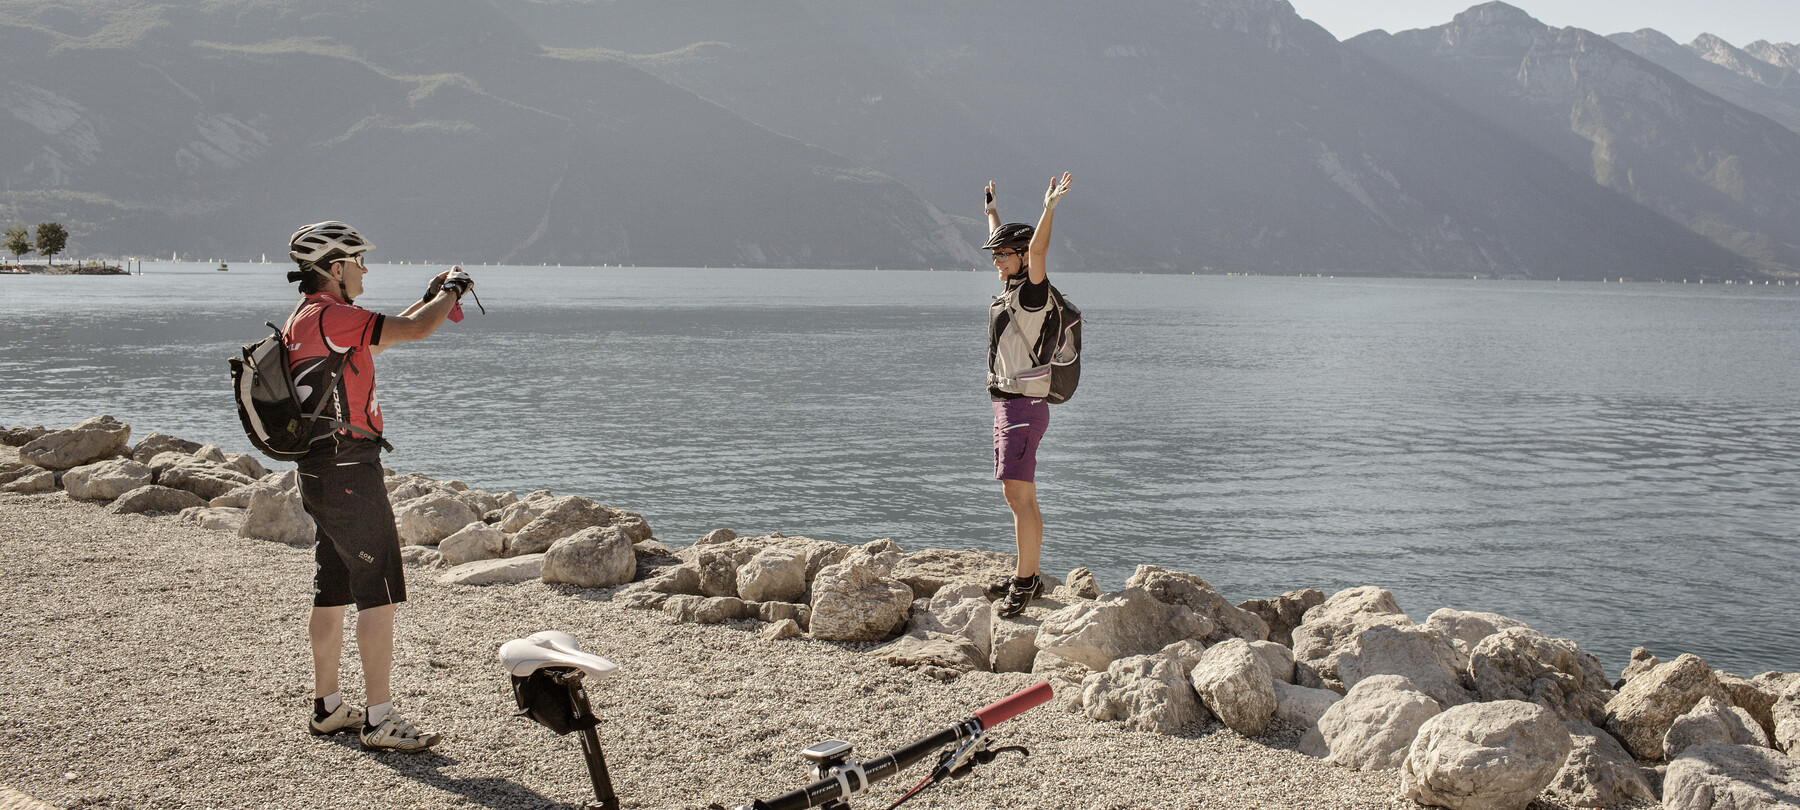 The Do-Ga cycling route: the final stage in Riva del Garda